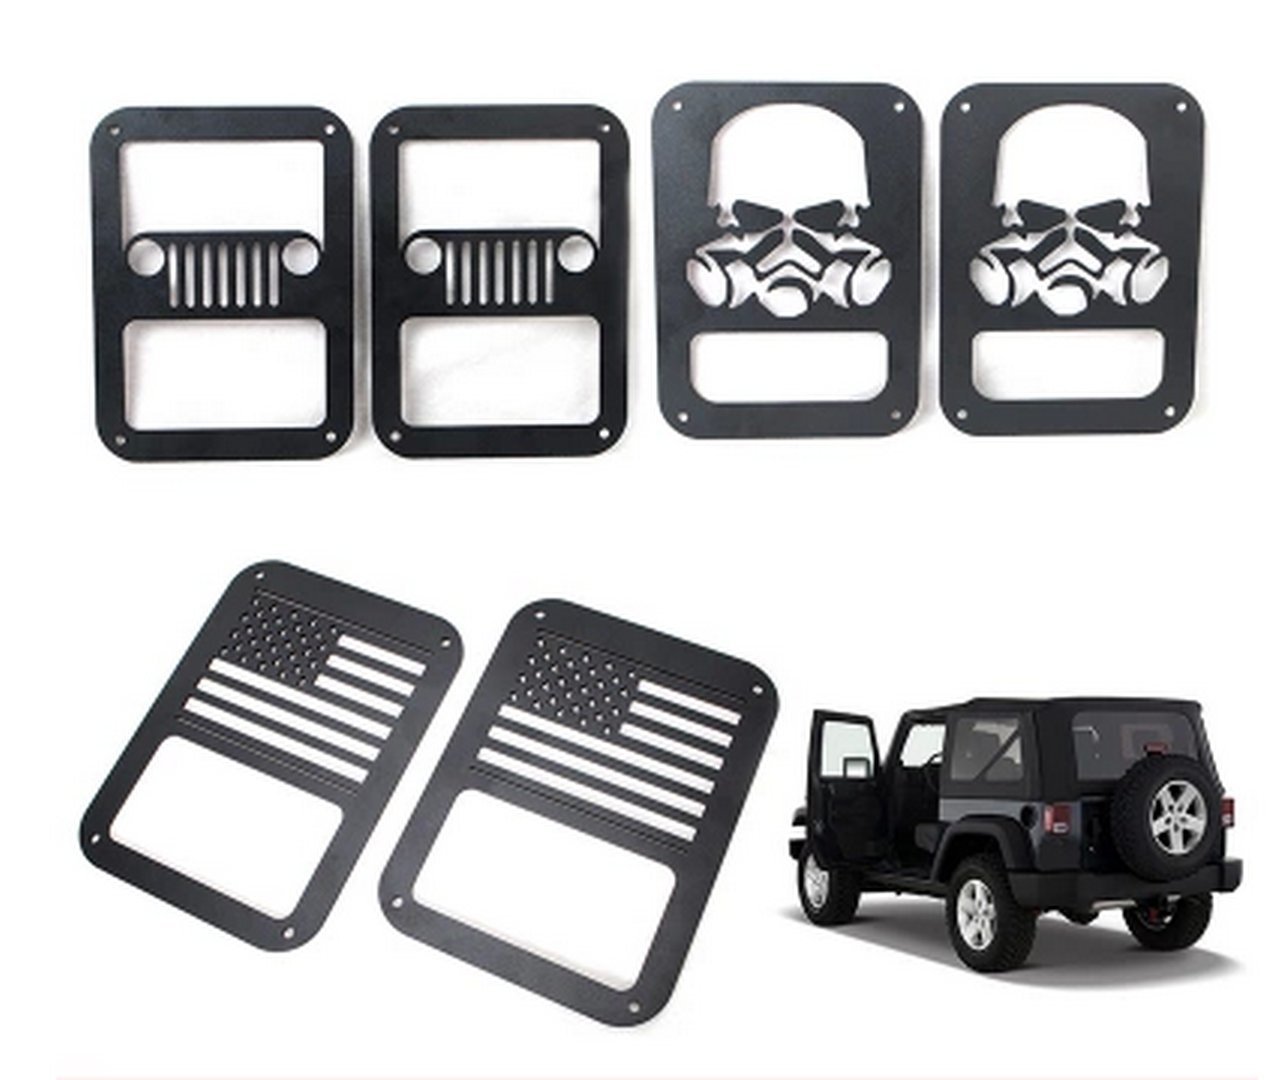 2 X Tail lamp Tail light Cover Trim Guards Protector for Jeep Wrangler Sport X S